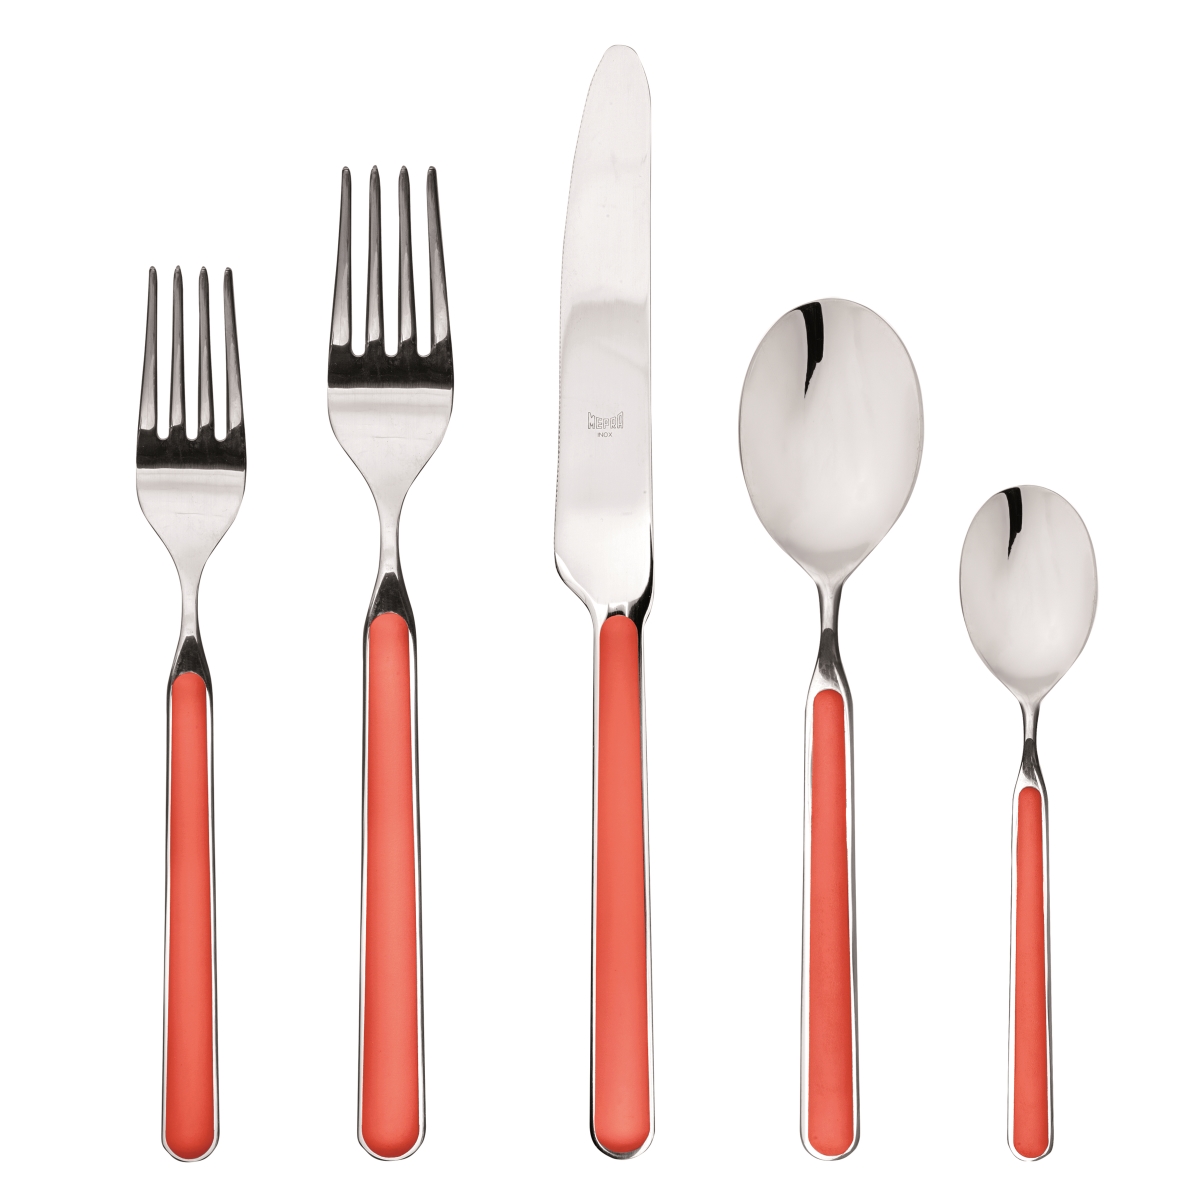 10c722005 Stainless Steel Fantasia Place Set, New Coral - 5 Piece